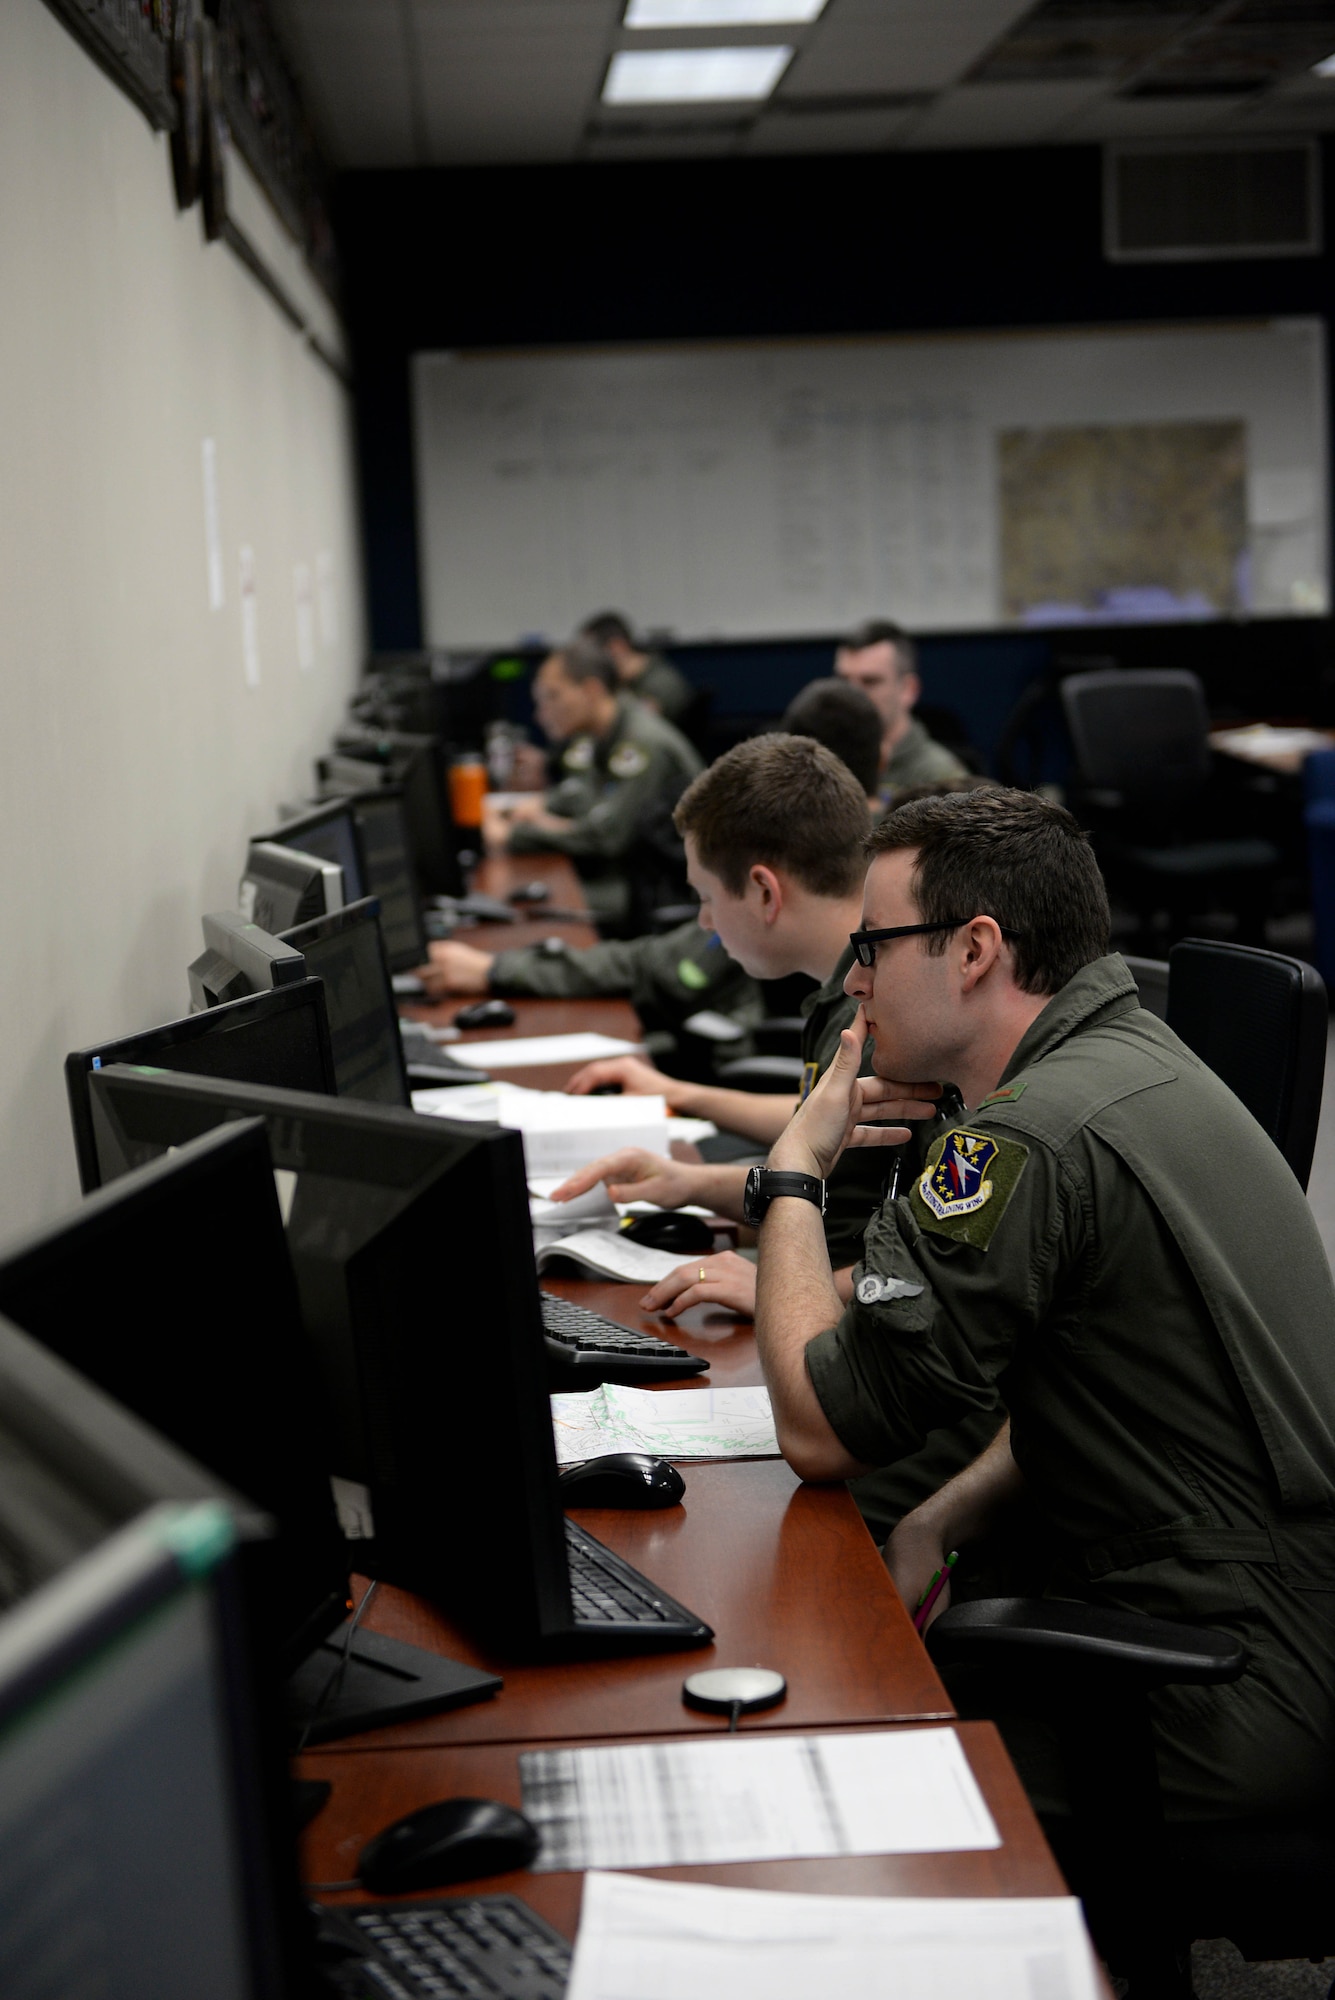 Student pilots in the 48th Flying Training Squadrons study for and plan their next flight April 10, 2018, on Columbus Air Force Base, Mississippi. Students throughout pilot training study often to keep up with the demanding syllabus. (U.S. Air Force photo by Airman 1st Class Keith Holcomb)